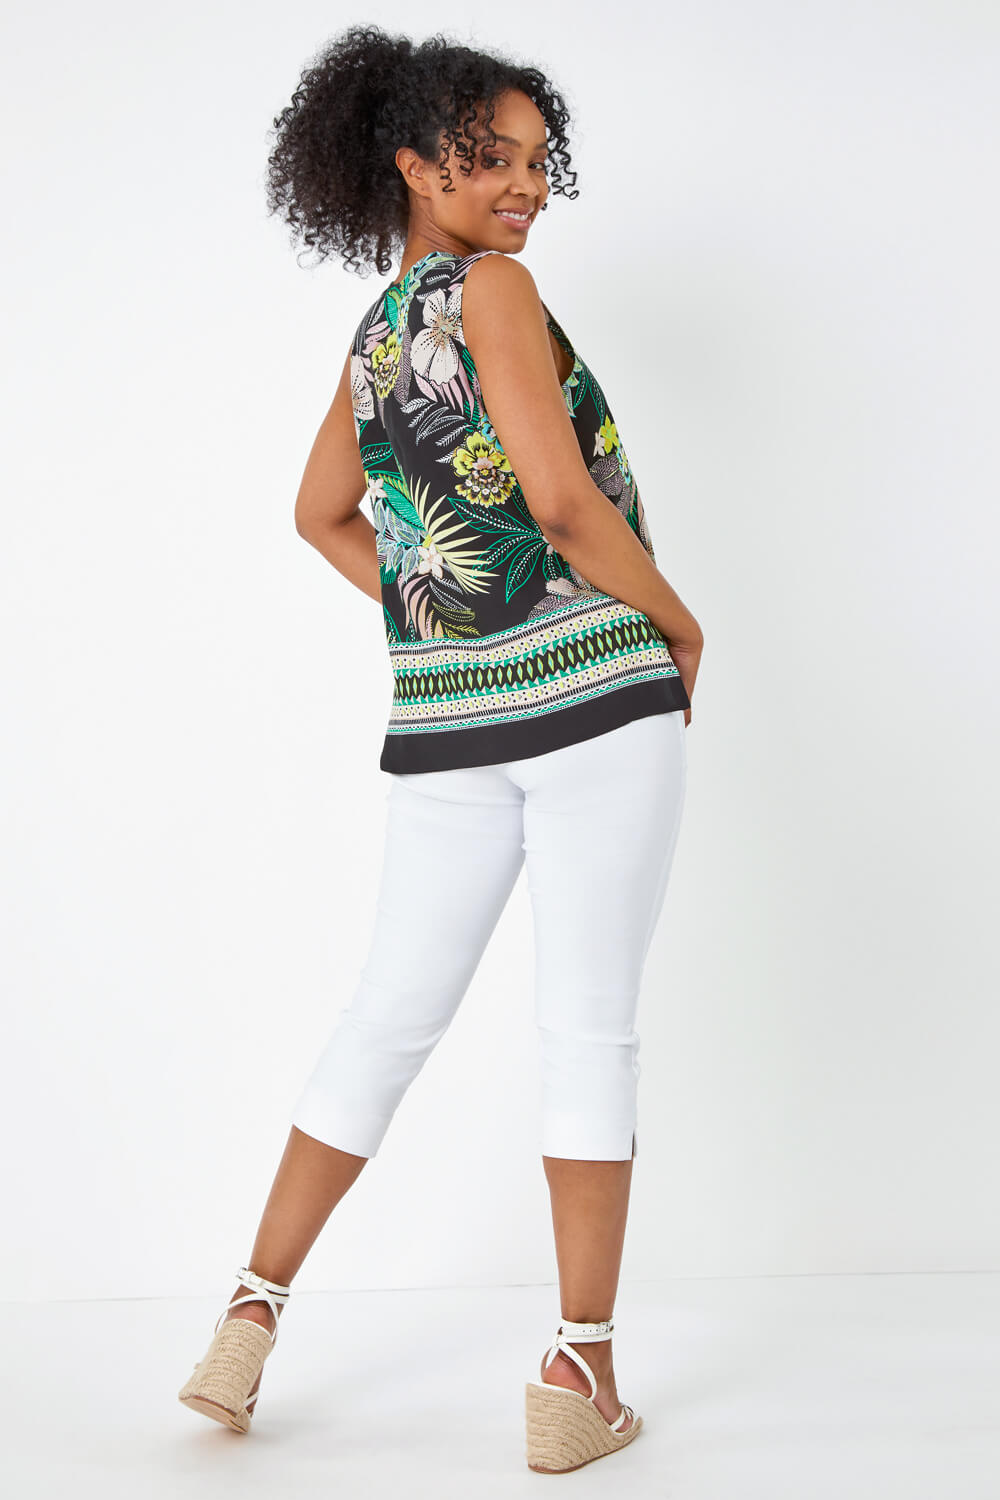 Lime Petite Floral Border Print Top, Image 3 of 5